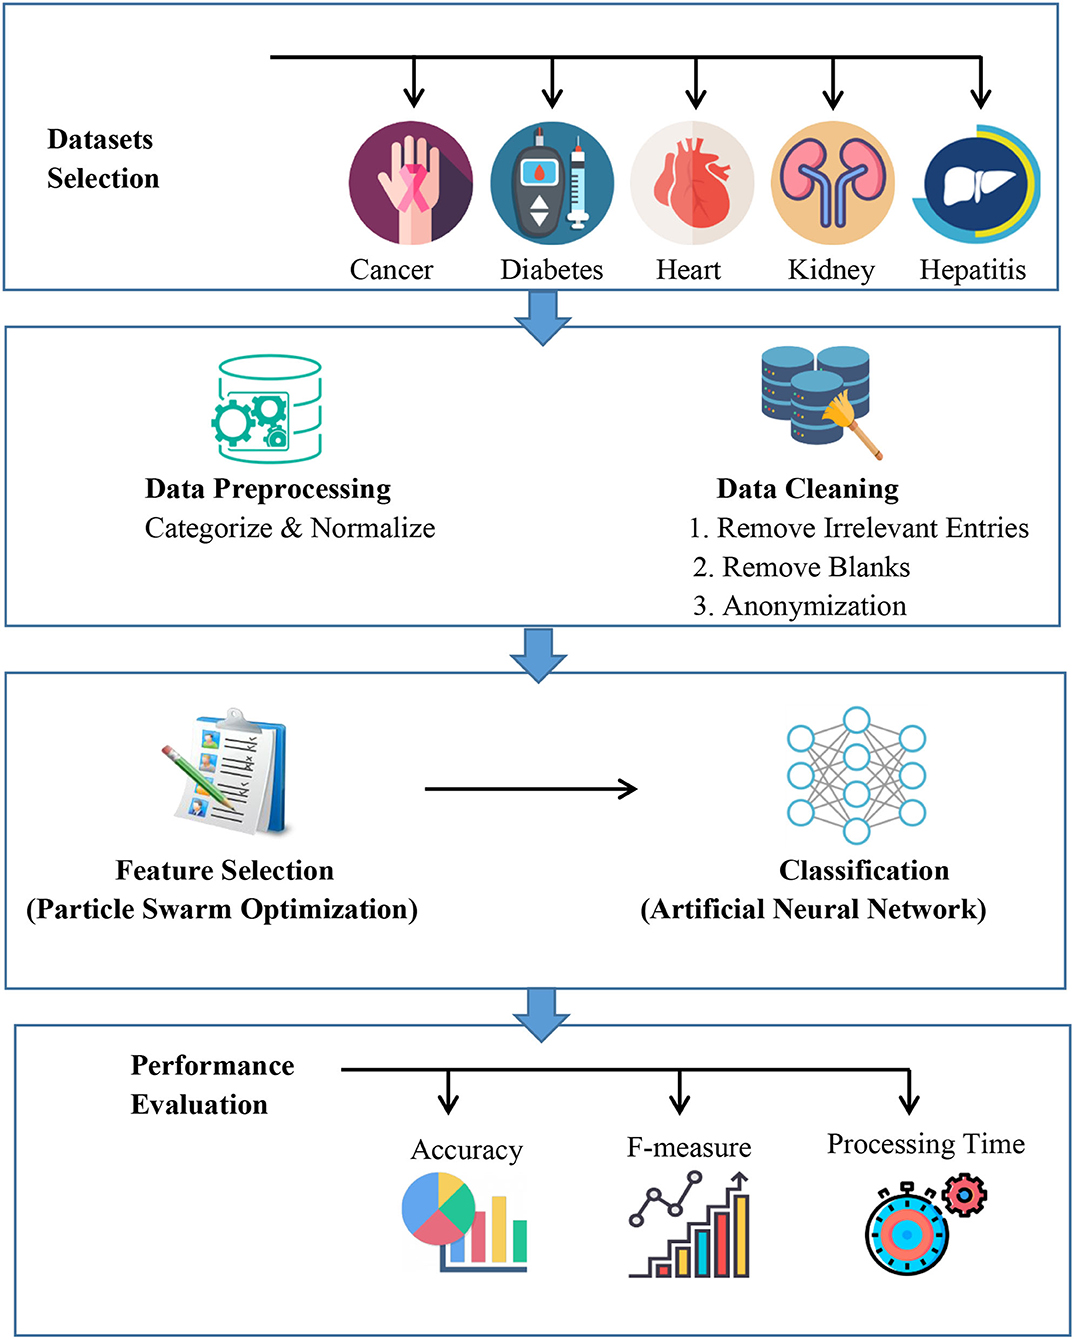 literature review on disease prediction using machine learning